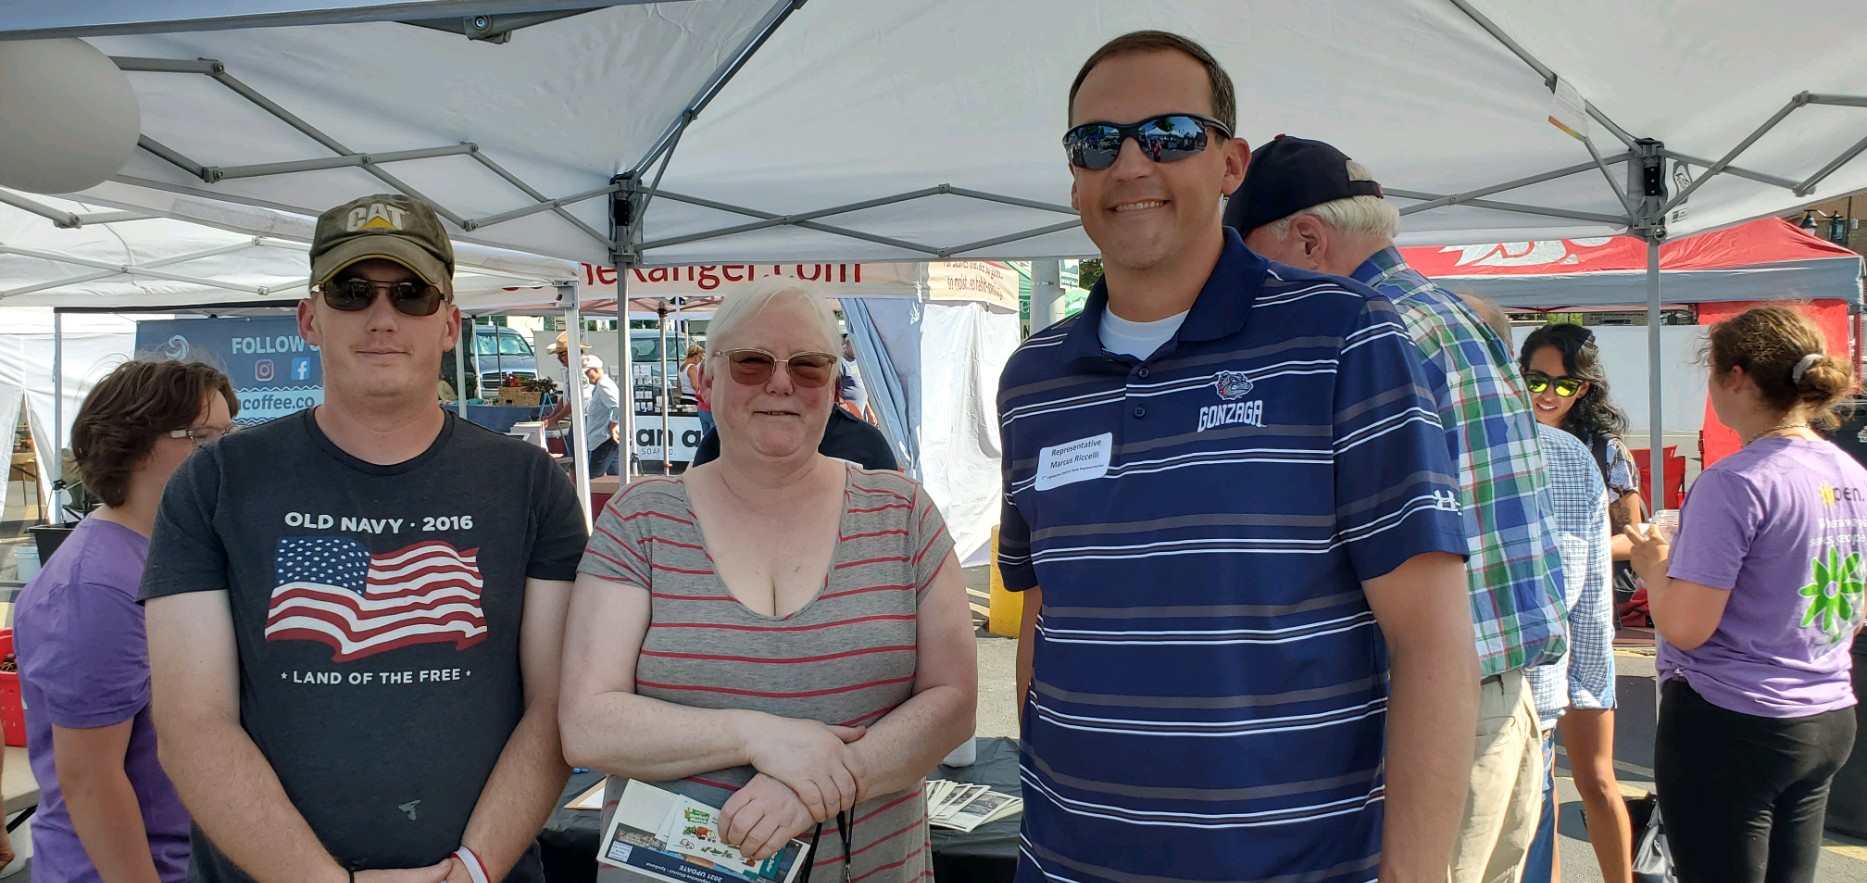 Rep. Riccelli with constituents at the Farmers Market